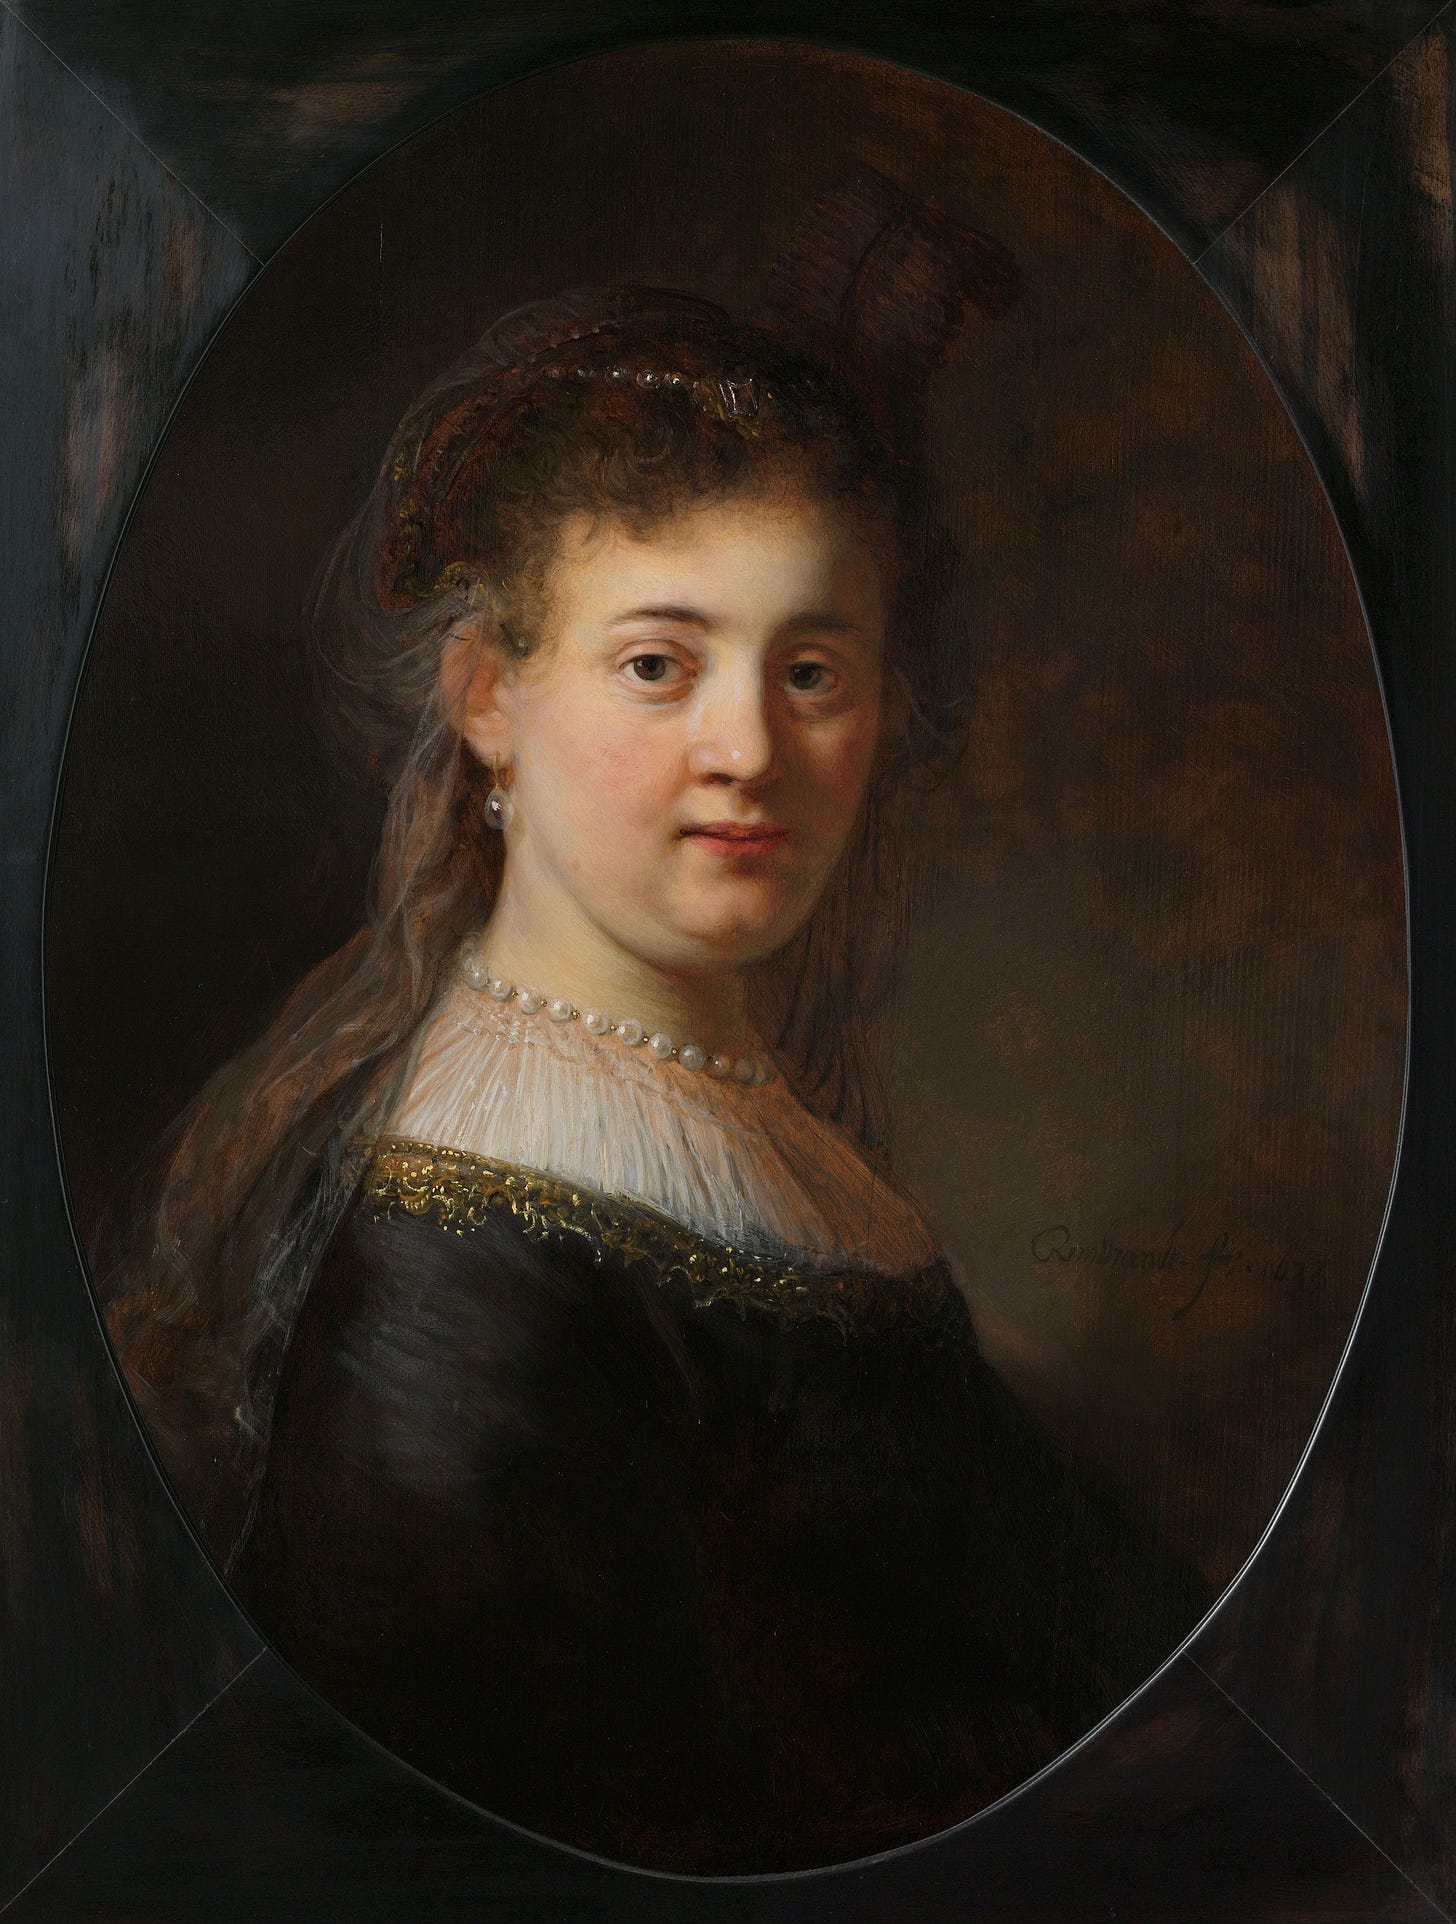 Young Woman in Fantasy Costume (1633) by Rembrandt van Rijn